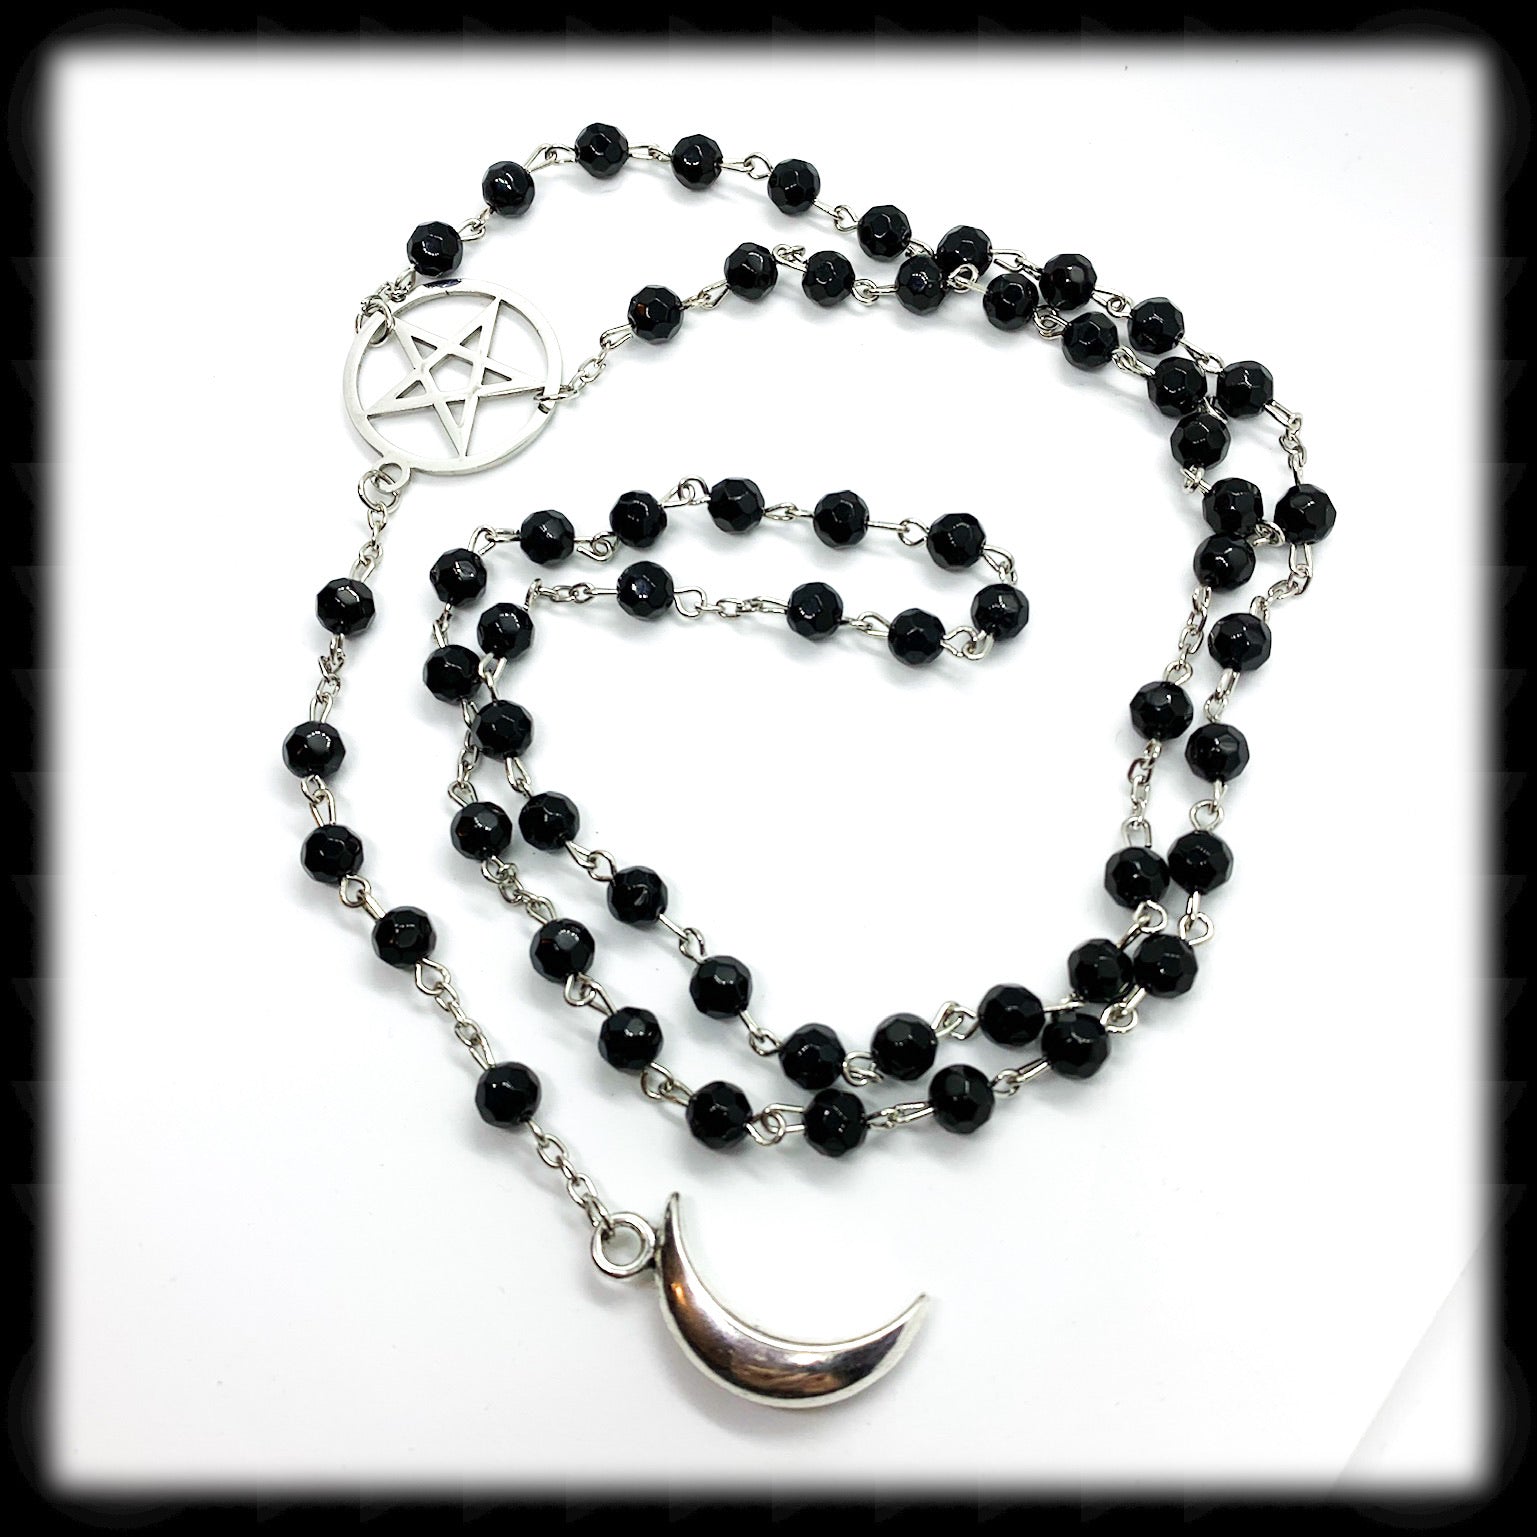 Witchy Gothic Long Rosary Necklace. Long Faceted Black Glass with Silver Pentacle and Crescent Moon - Darkmoon Fayre